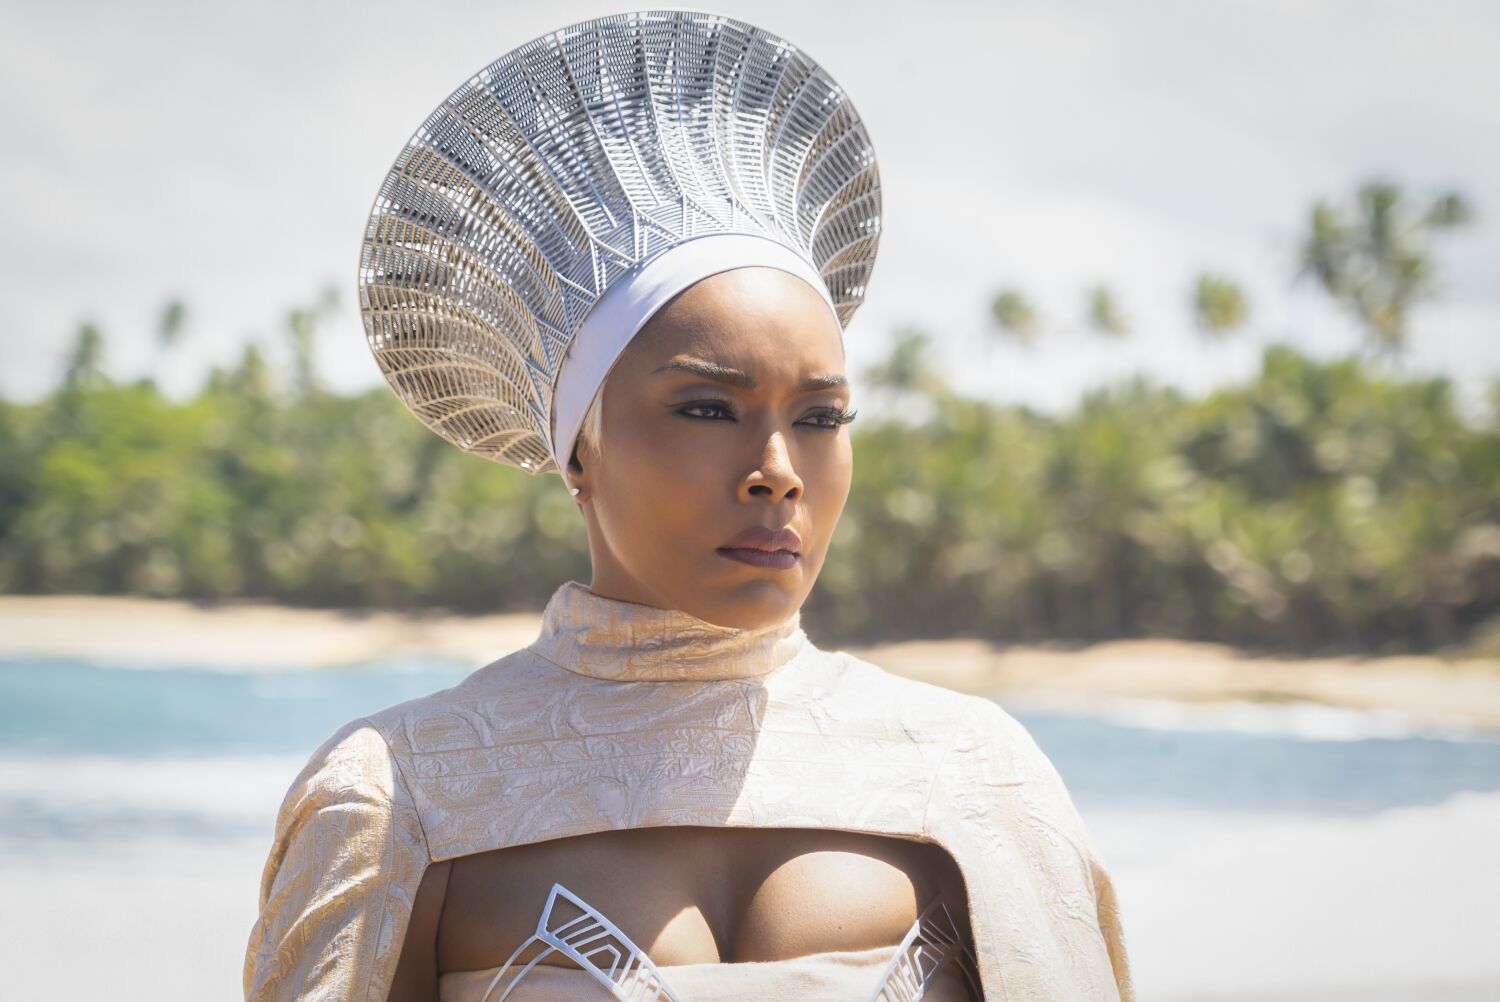 2023 NAACP Image Awards nominations show love for 'Wakanda Forever,' 'Abbott,' Beyoncé